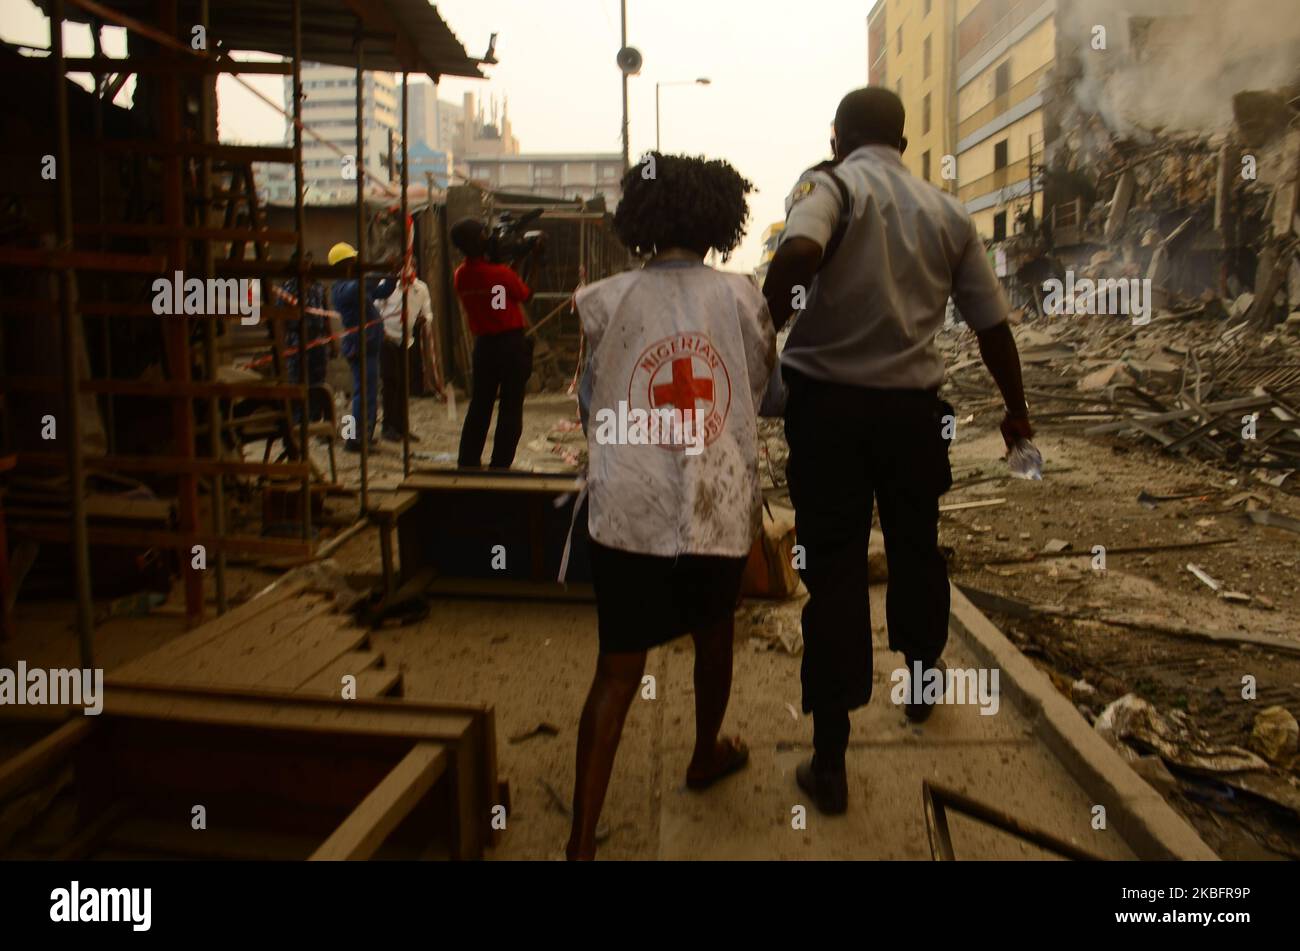 A Red Cross official is been rushed down for treatment after a fire broke out in a section of the balogun market in Lagos Island on January 29, 2020. (Photo by Olukayode Jaiyeola/NurPhoto) Stock Photo